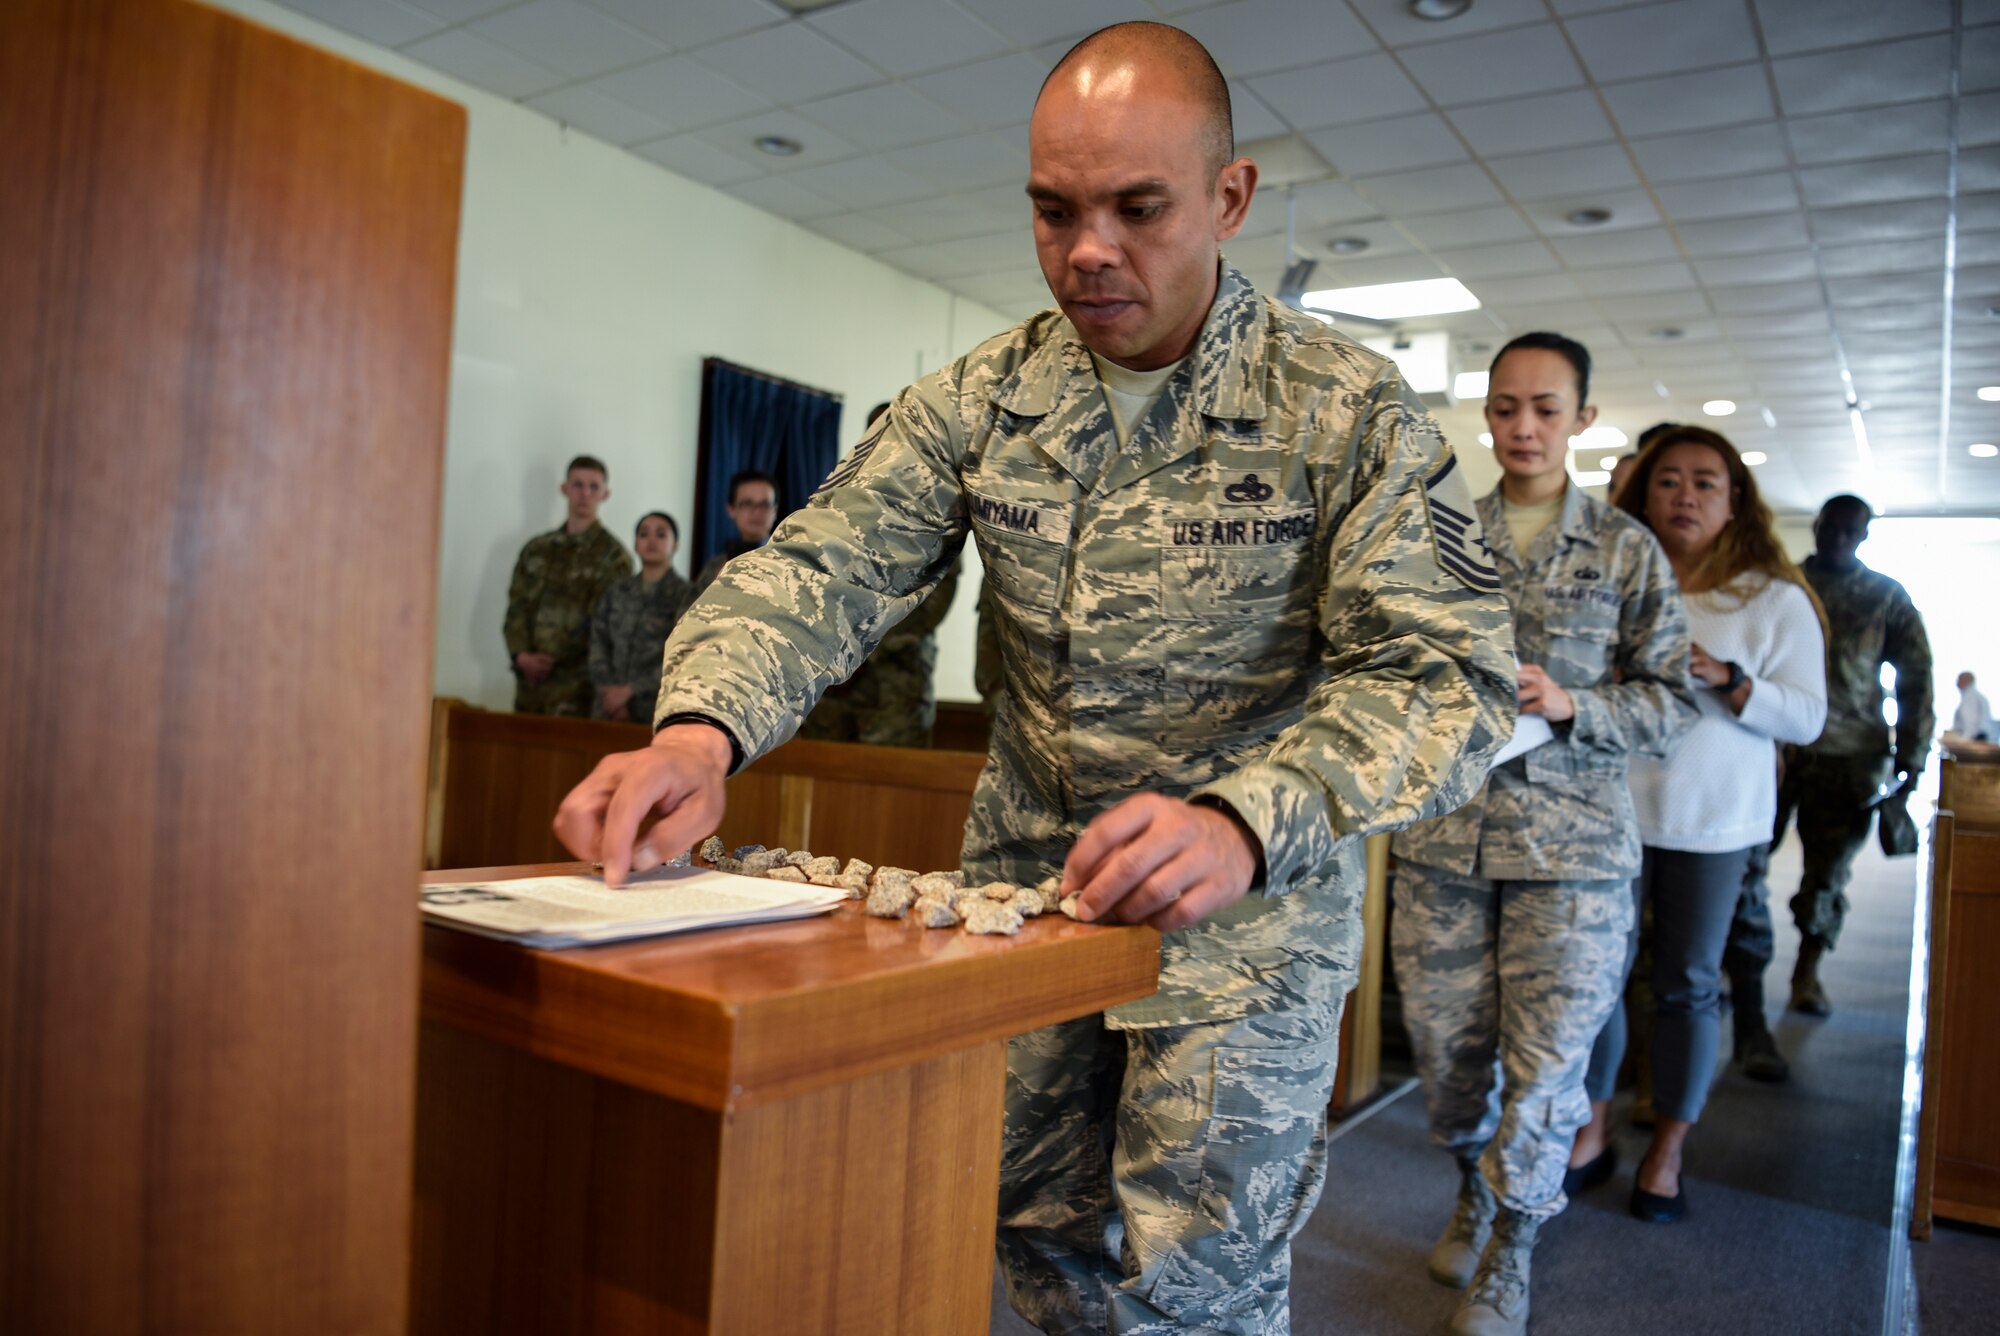 Master Sgt. Michael Kumiyama, 8th Force Support Squadron career assistant advisor, places a story of the Holocaust victims and a pebble on a table during Kunsan Air Base’s Holocaust Remembrance Ceremony at the Base Chapel on May 2, 2019. The ceremony is part of the national Days of Remembrance observance established by Congress to commemorate the Holocaust. This year, it is observed from April 28 through May 5. (U.S. Air Force photo by Capt. Remoshay Nelson)